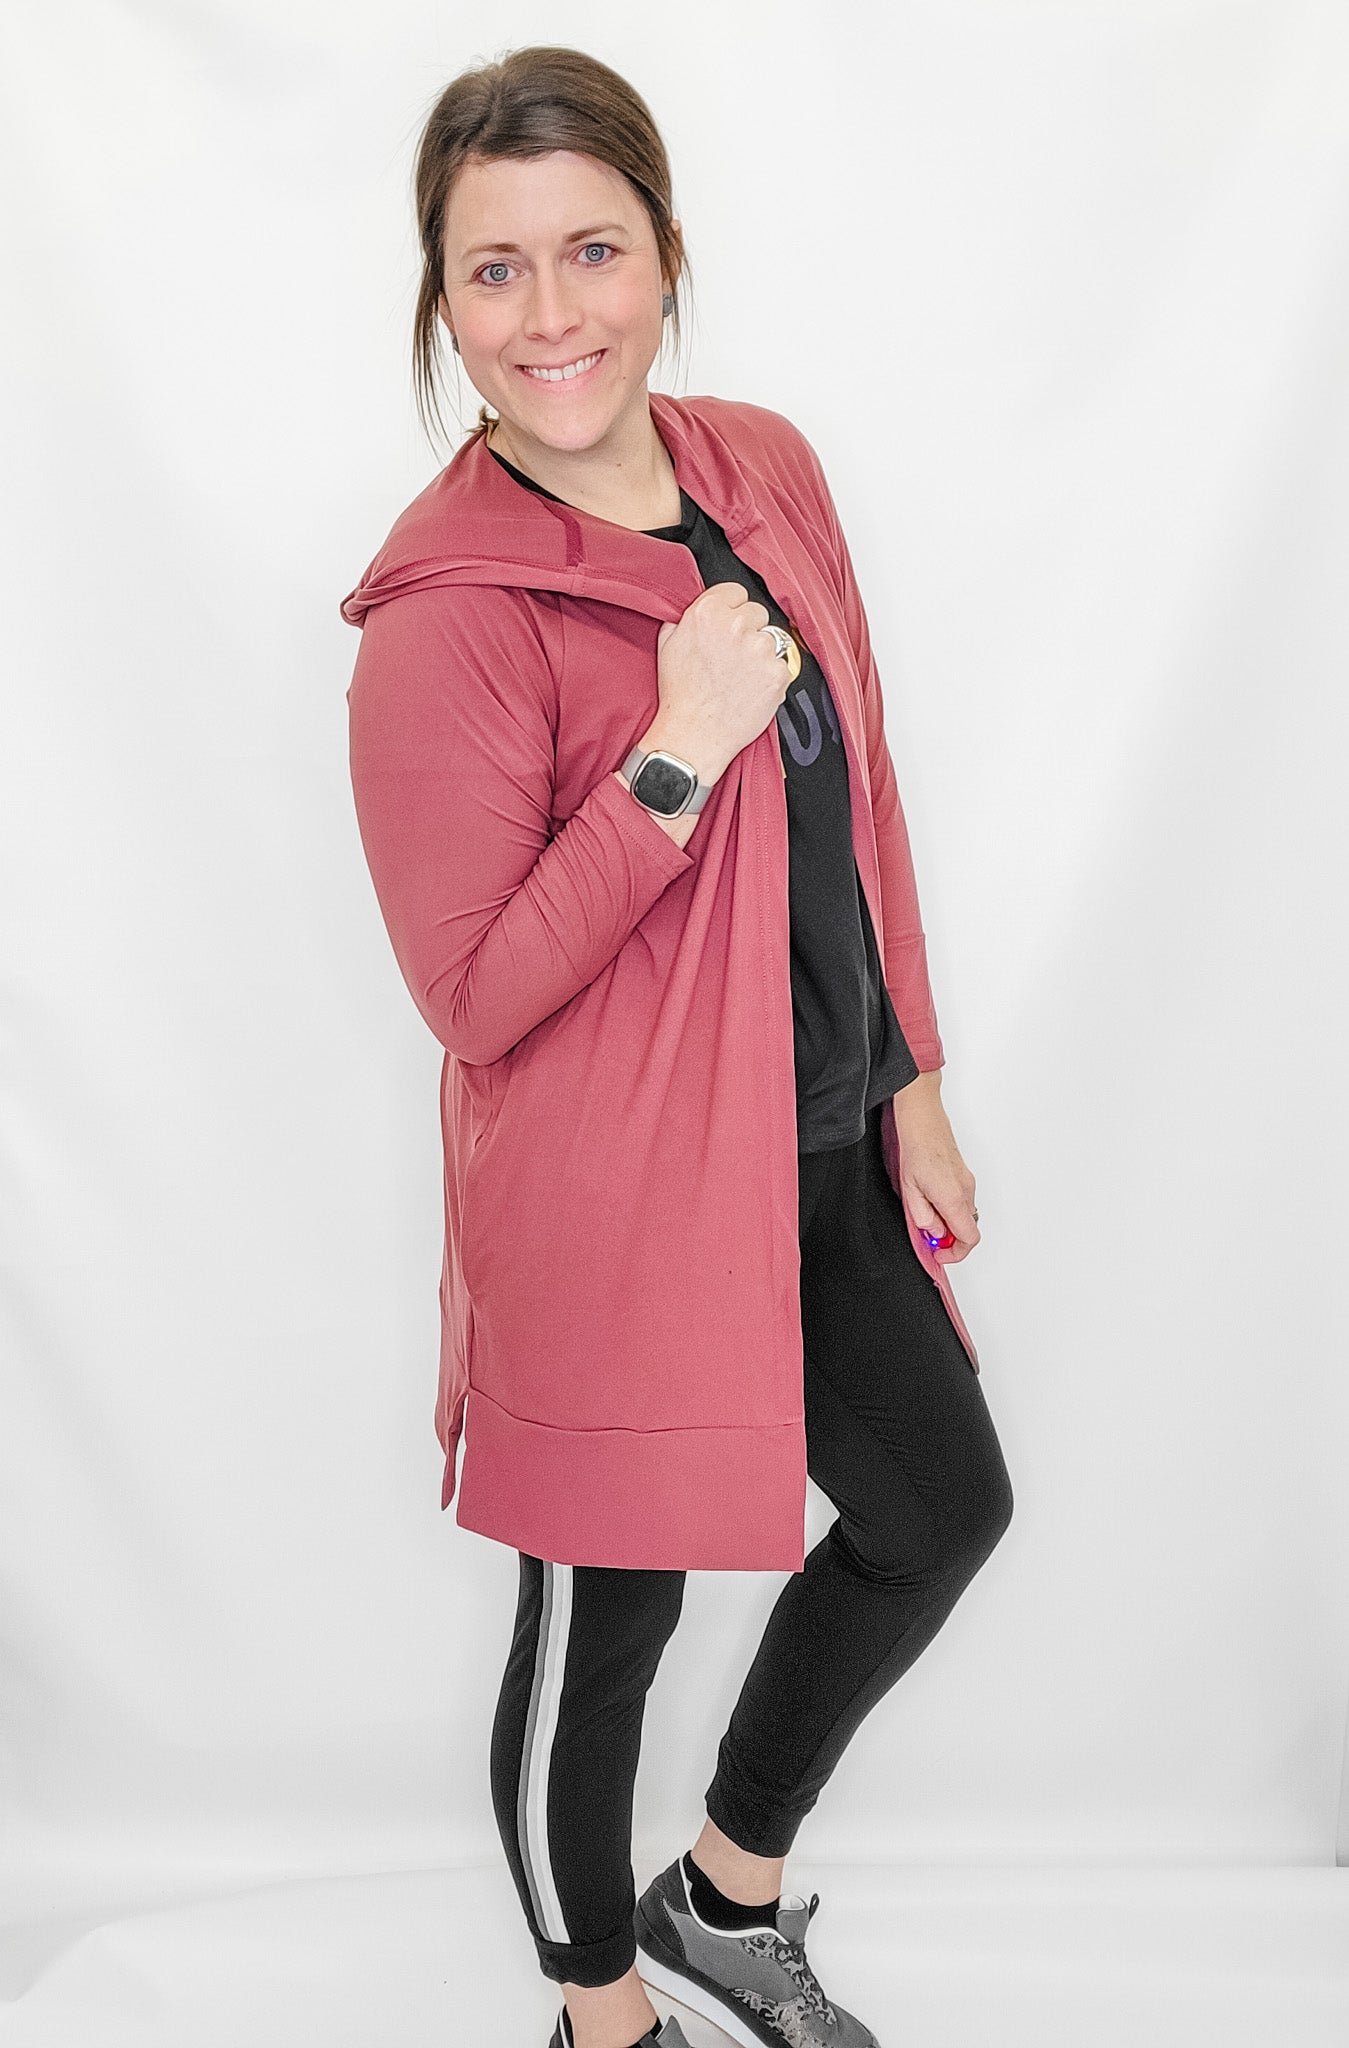 FitKicks Pink Active Lifestyle Cardigan - Variety